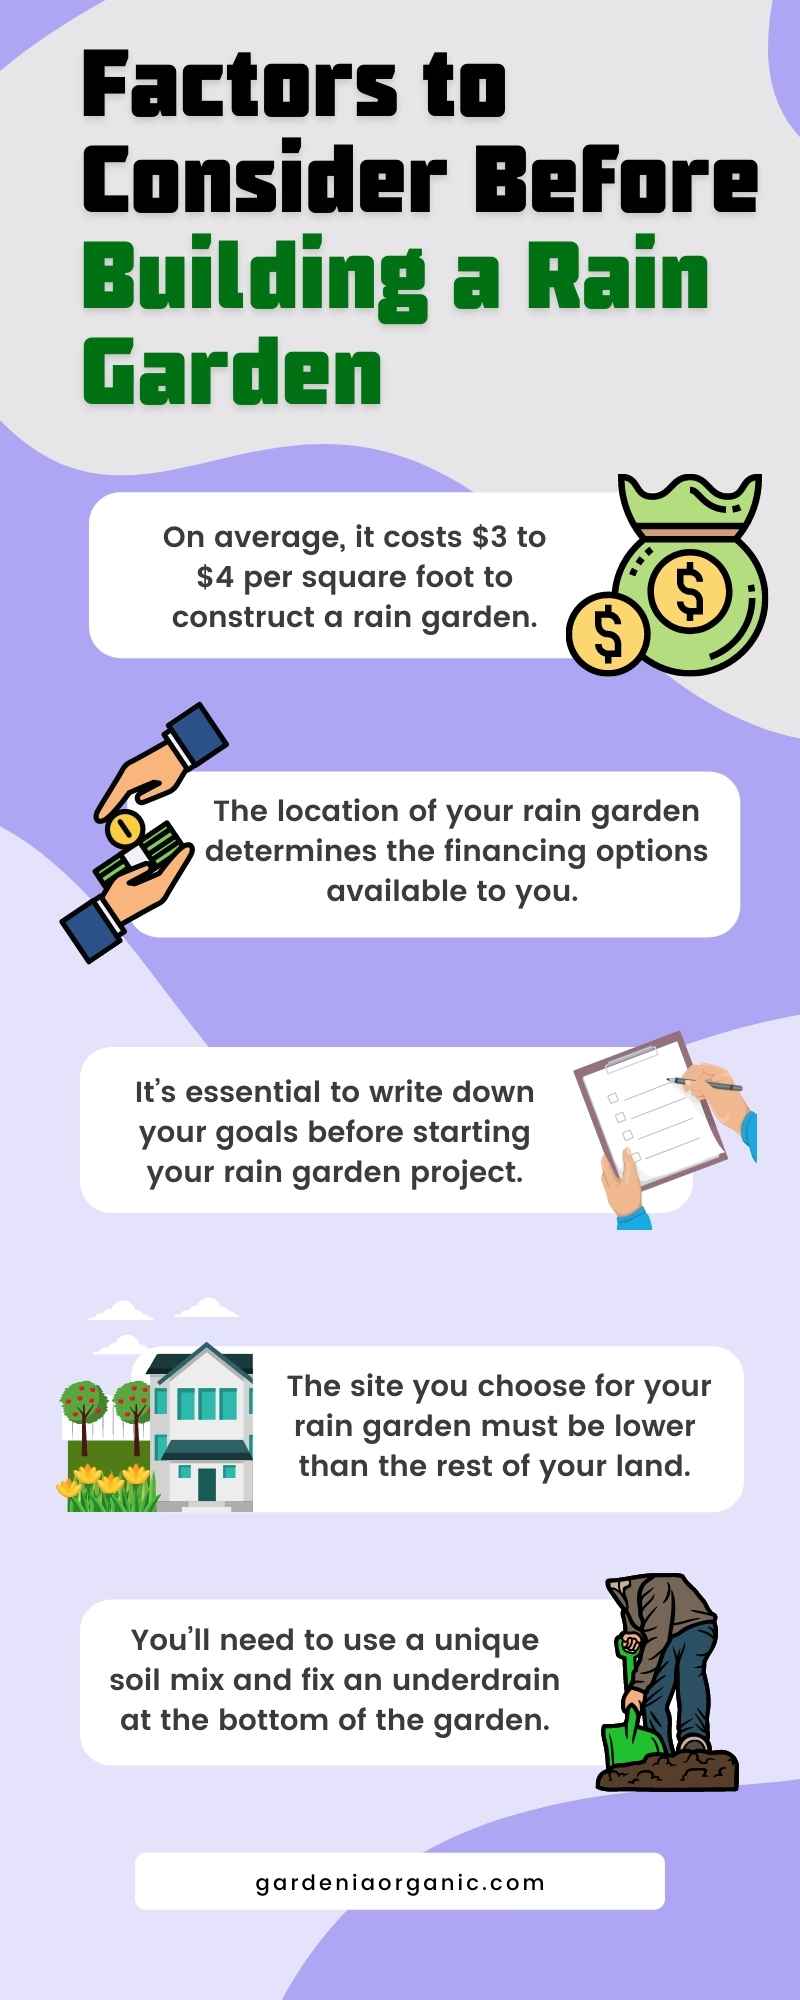 Things to consider before building rain garden